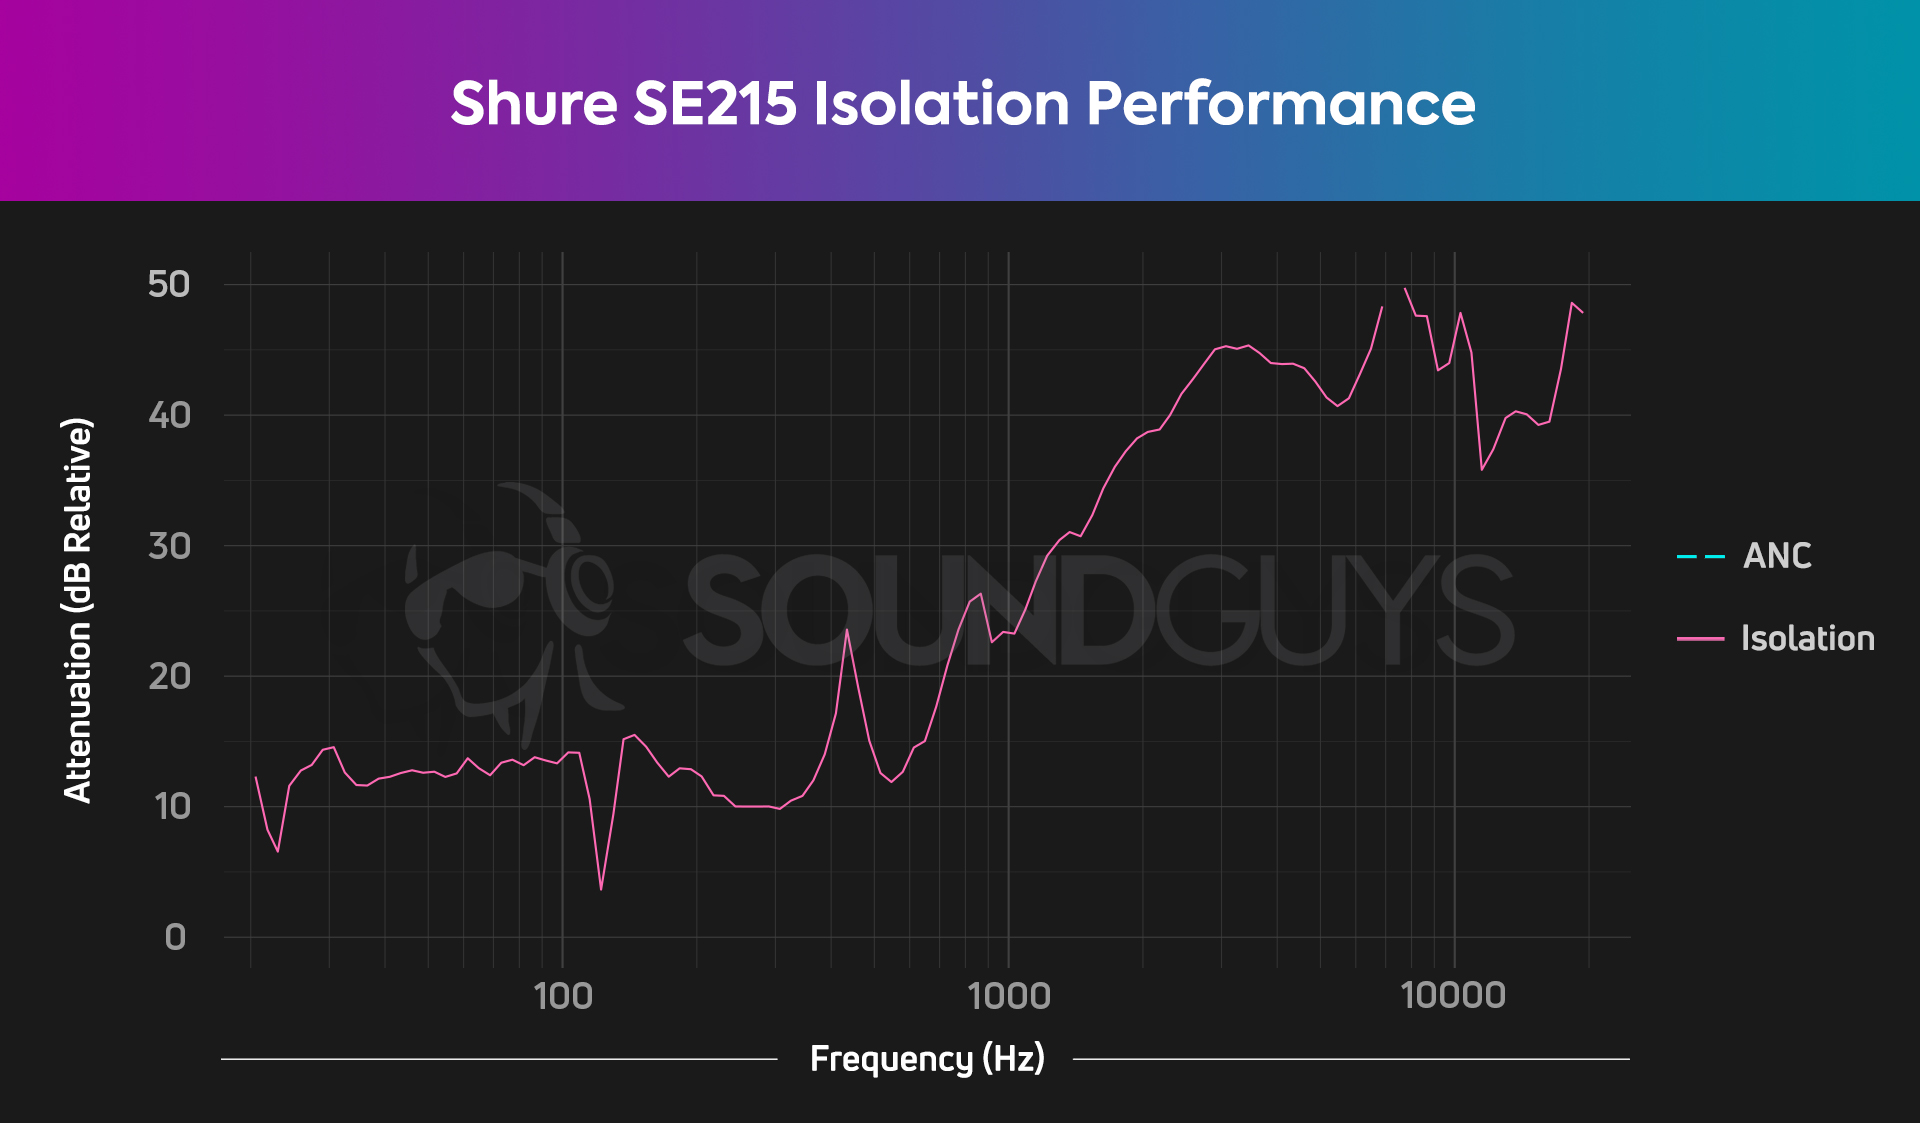 This chart shows the isolation performance of the Shure SE215, which does more to block out noise than many noise canceling earbuds.